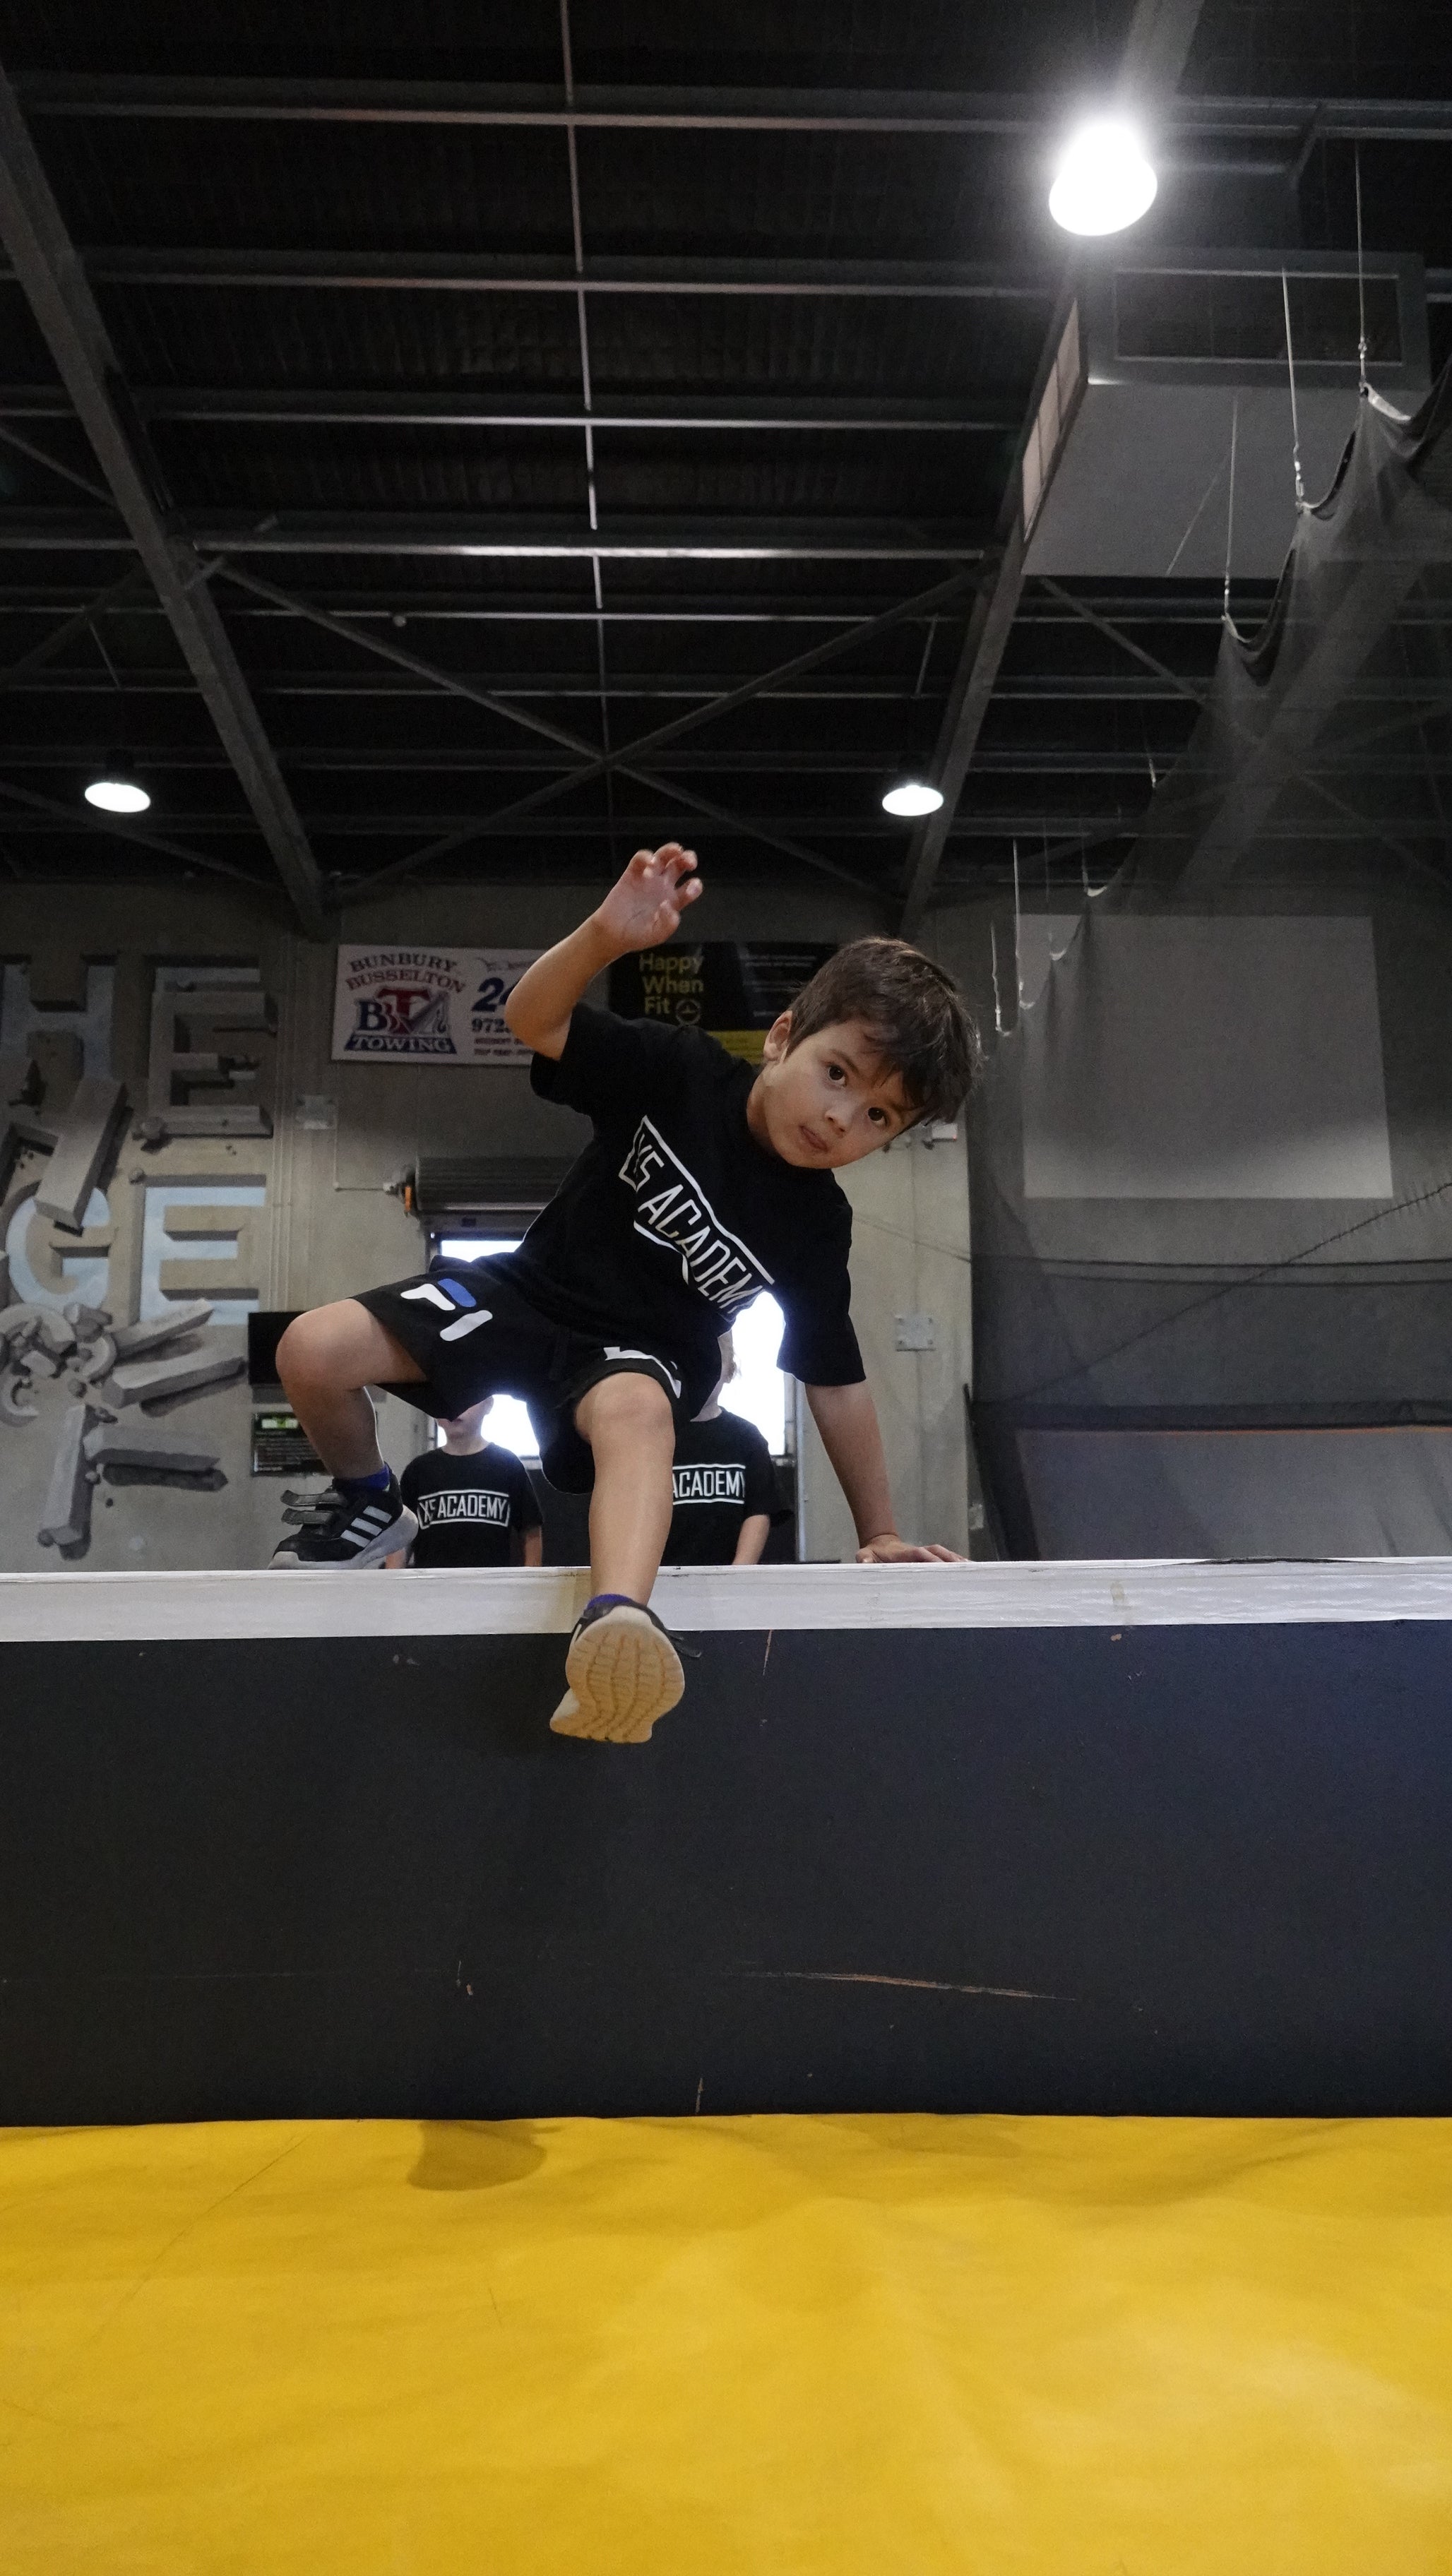 PEE-WEE PARKOUR:   . 3-4 YRS FRIDAY 9:30-10:00 TERM 2